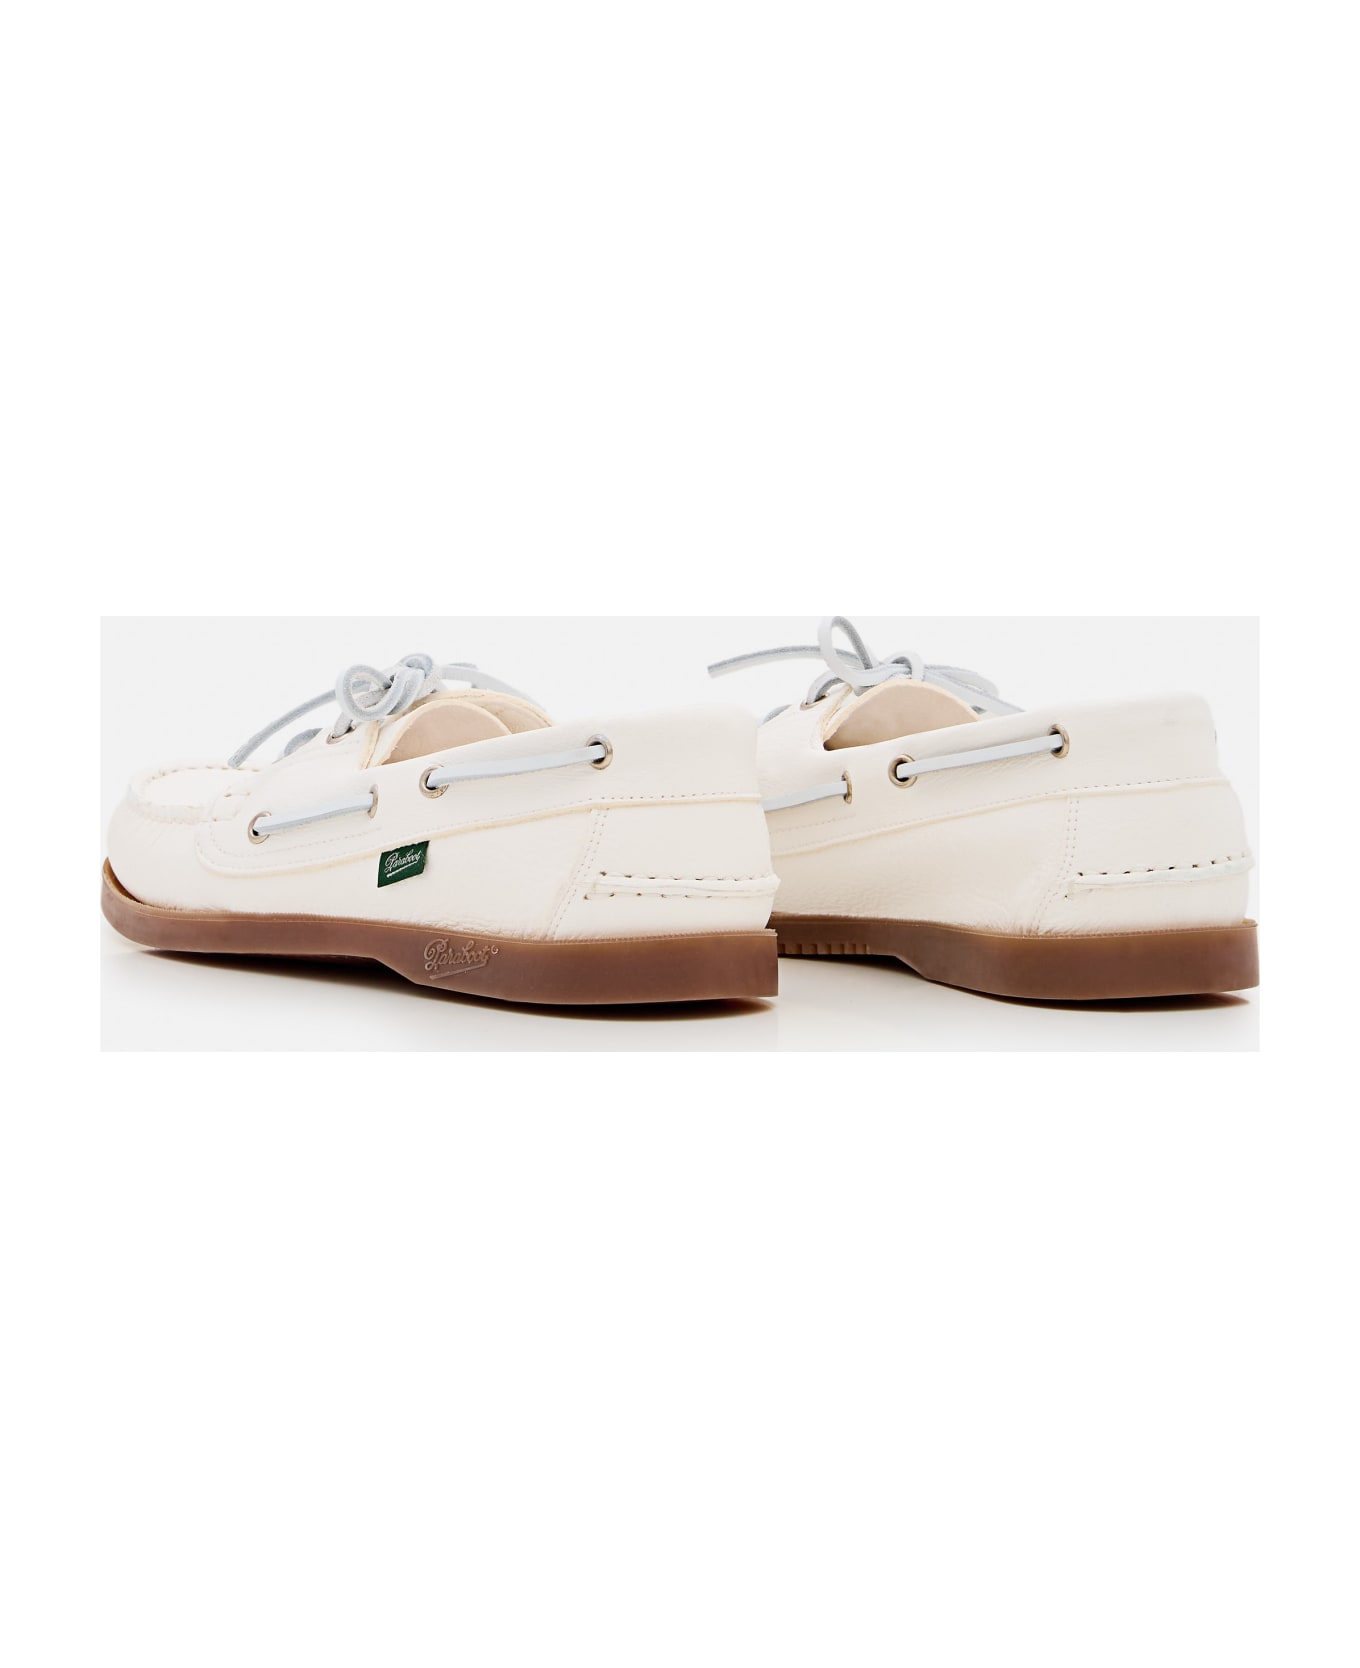 Paraboot Barth/marine Miel-cerf Blanc Loafers - White